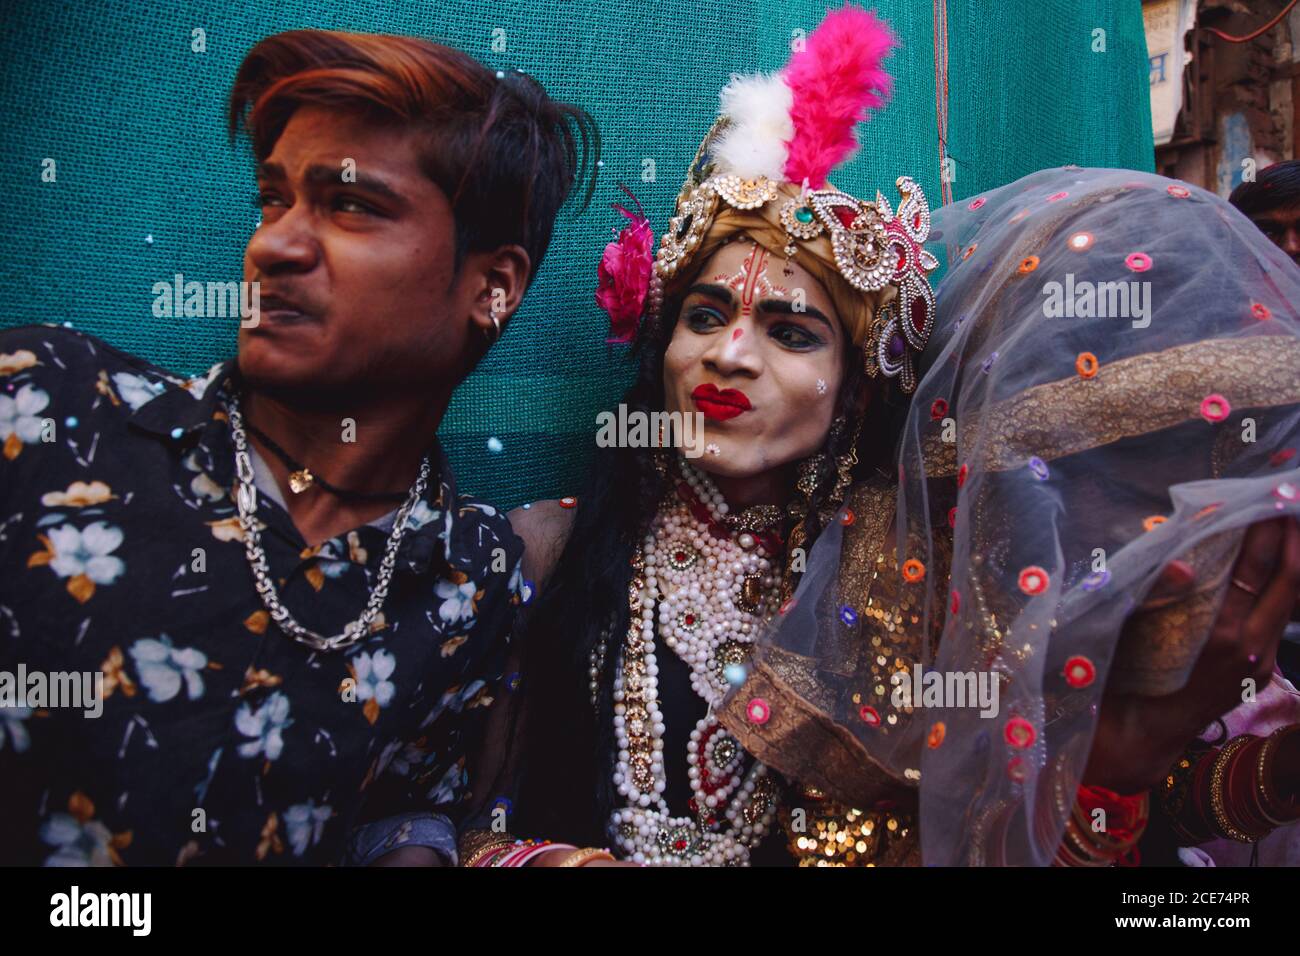 India - March 9, 2020: Ethnic people in funky wear looking away during festive event on street Stock Photo